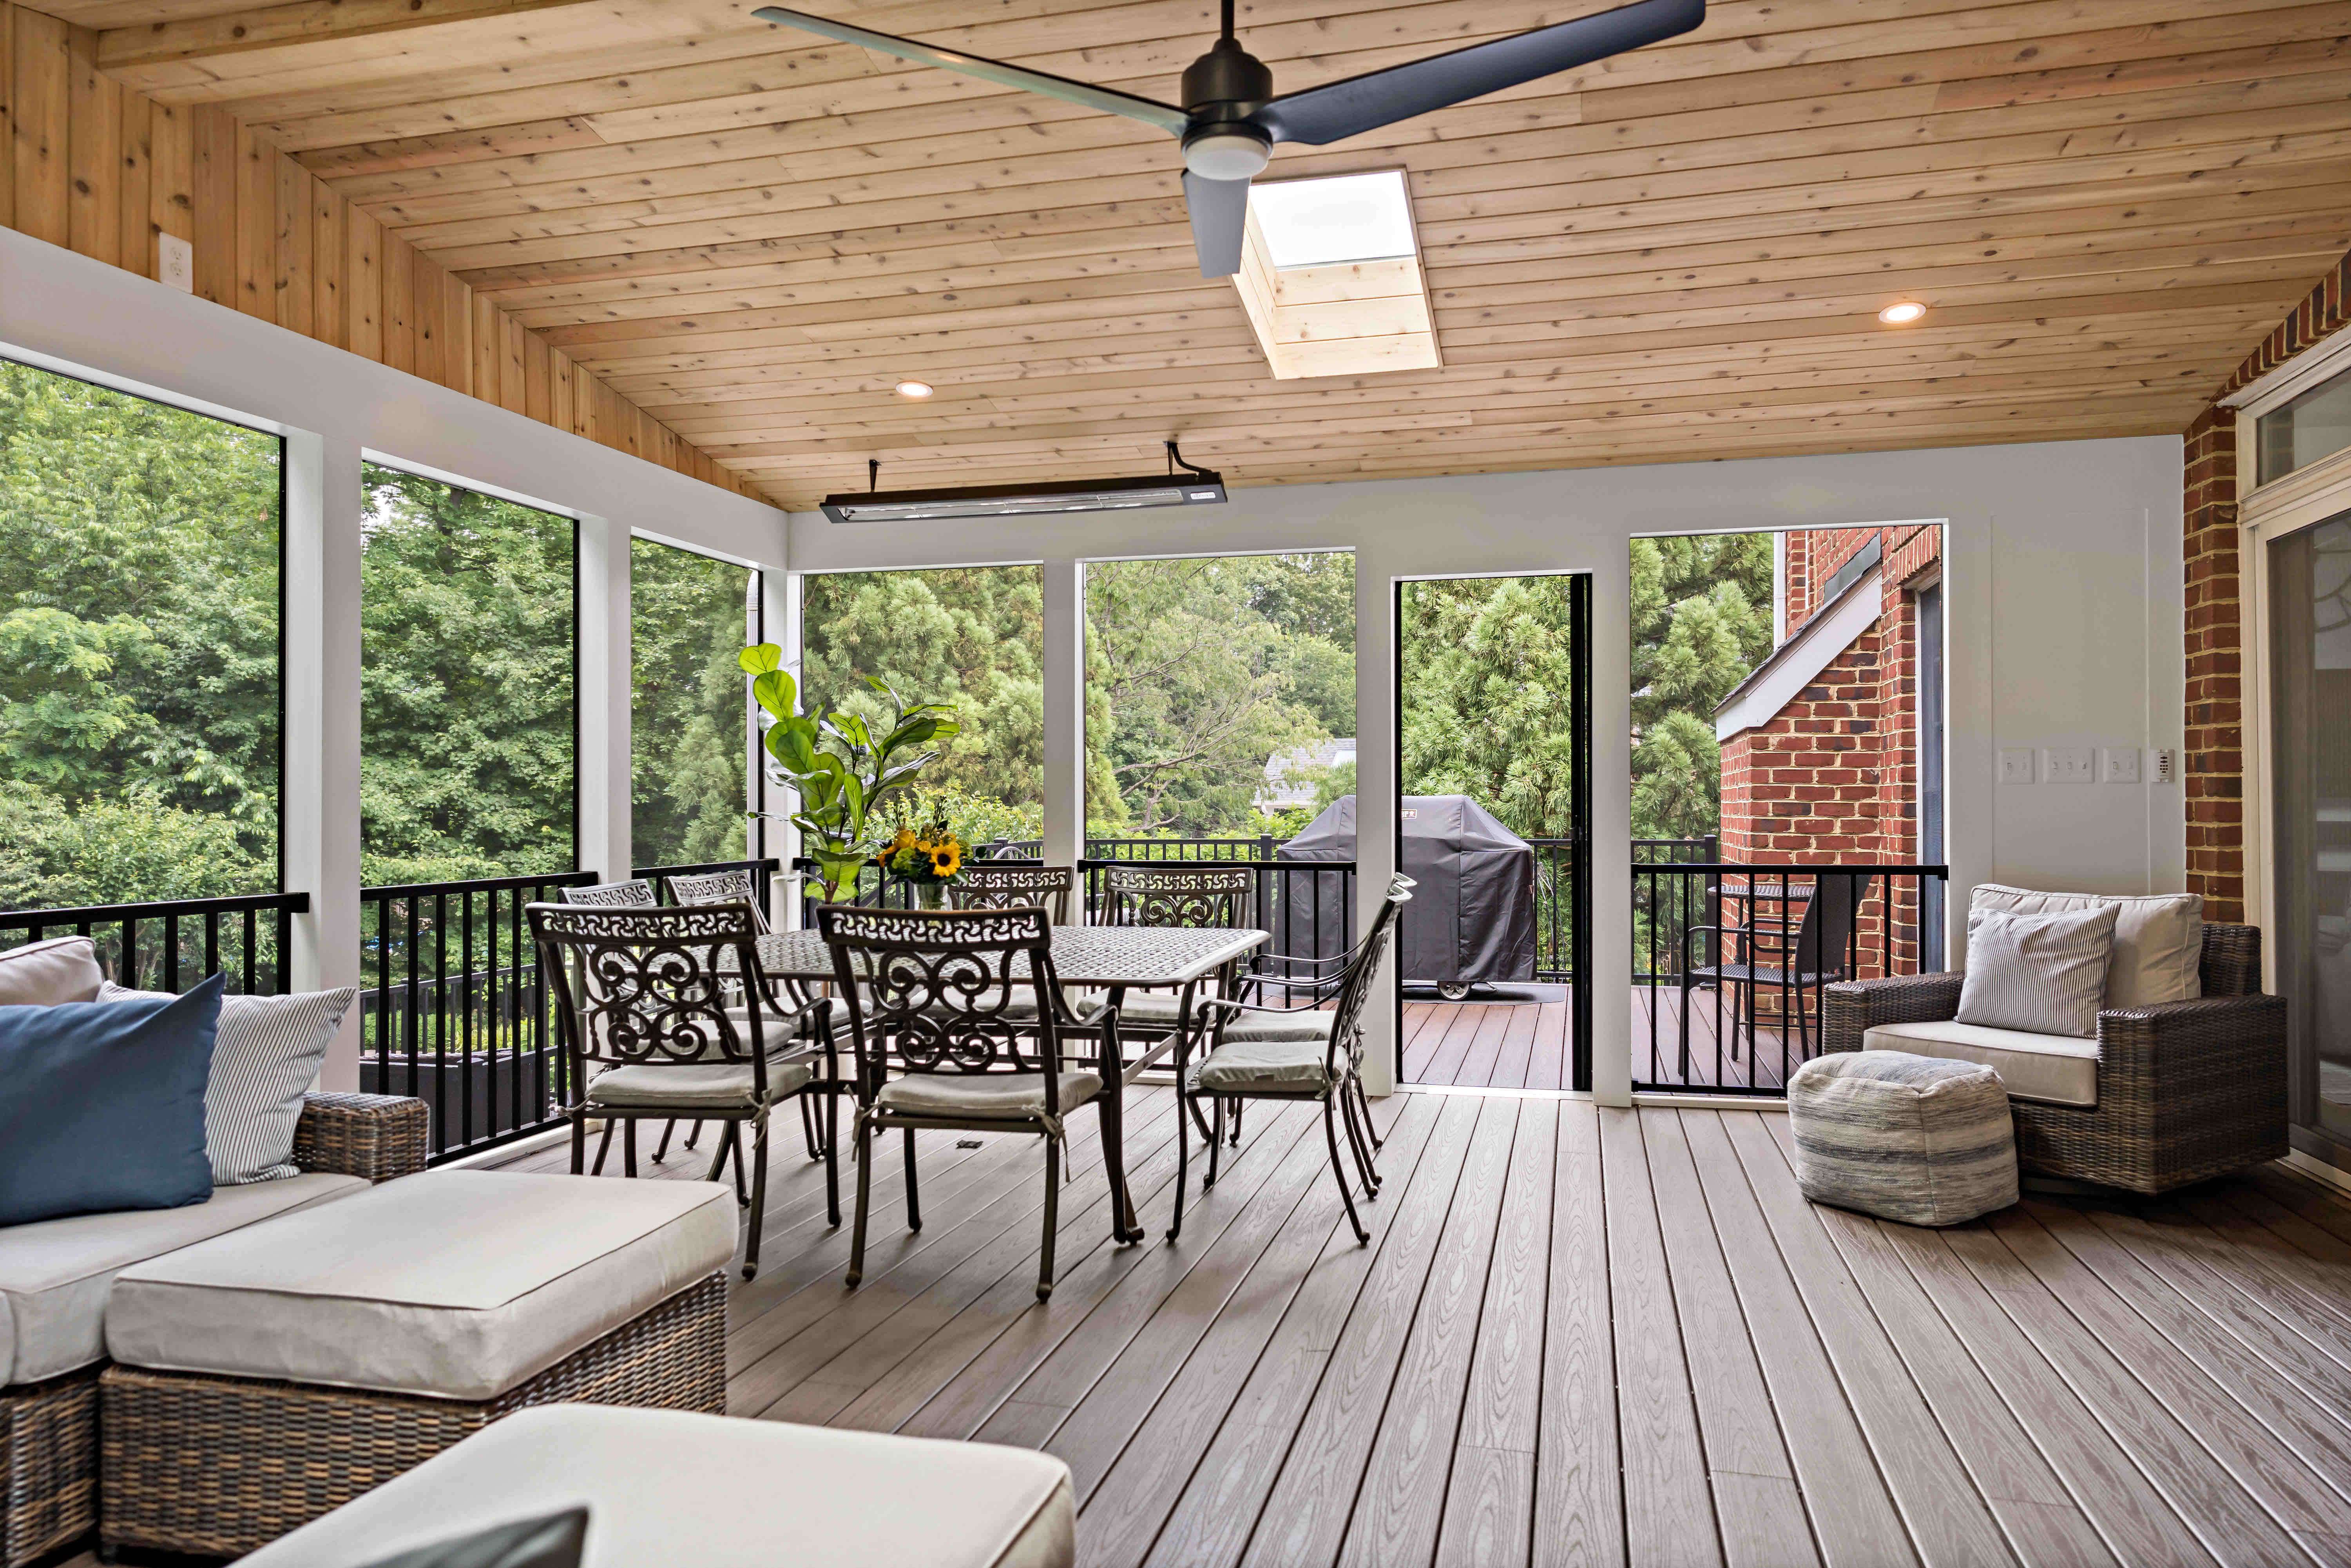 Screened porch with skylight window and ceiling fan